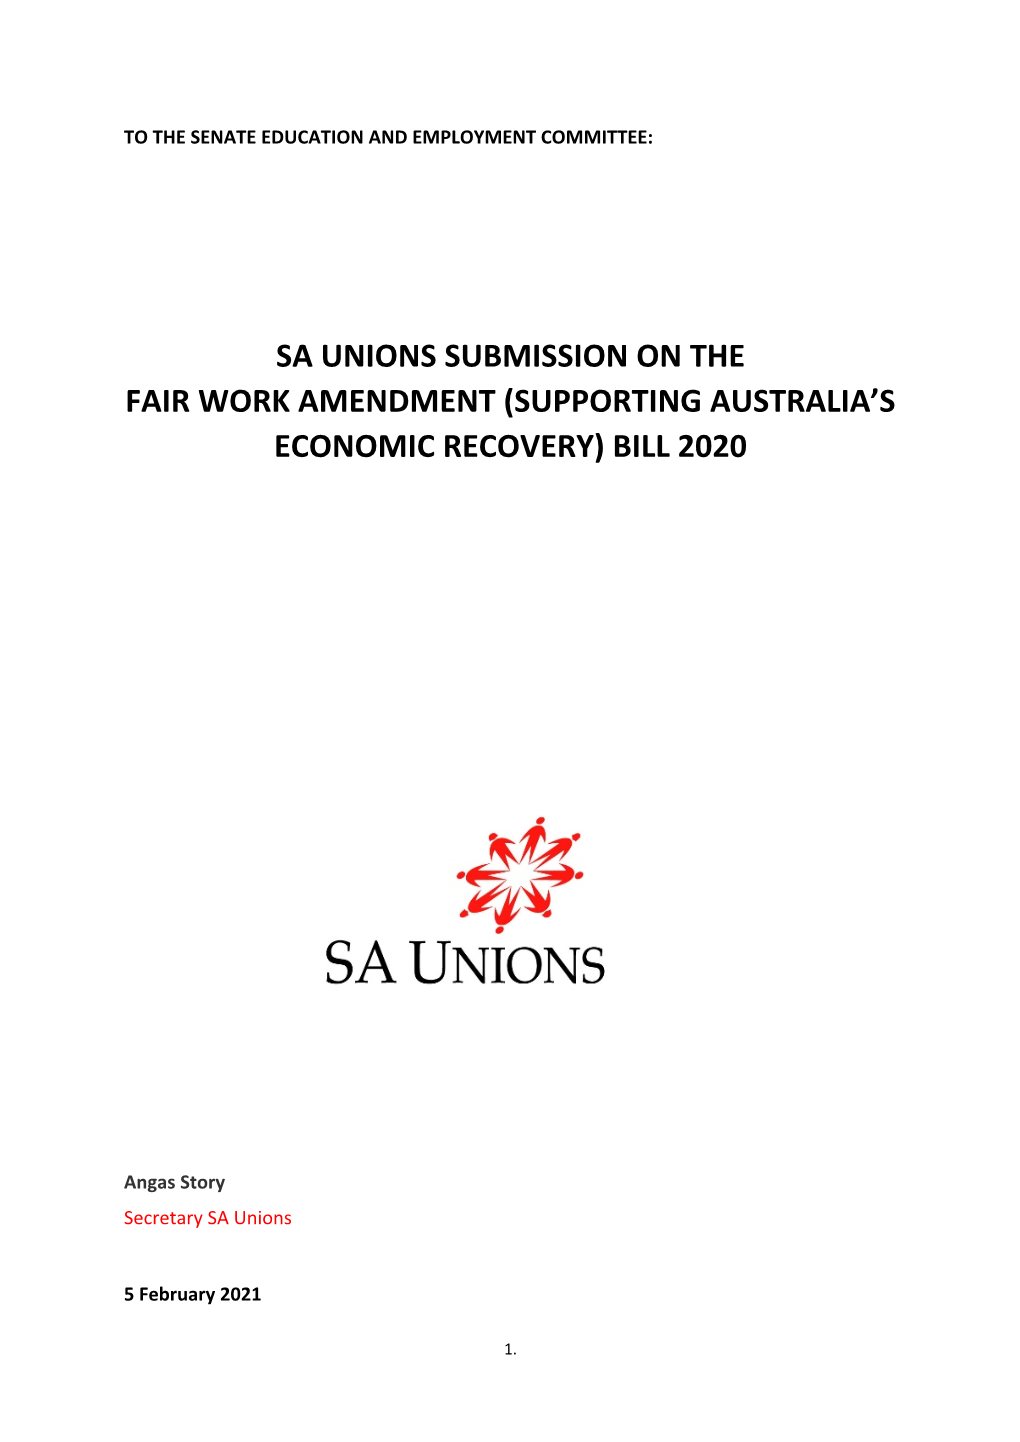 Sa Unions Submission on the Fair Work Amendment (Supporting Australia’S Economic Recovery) Bill 2020